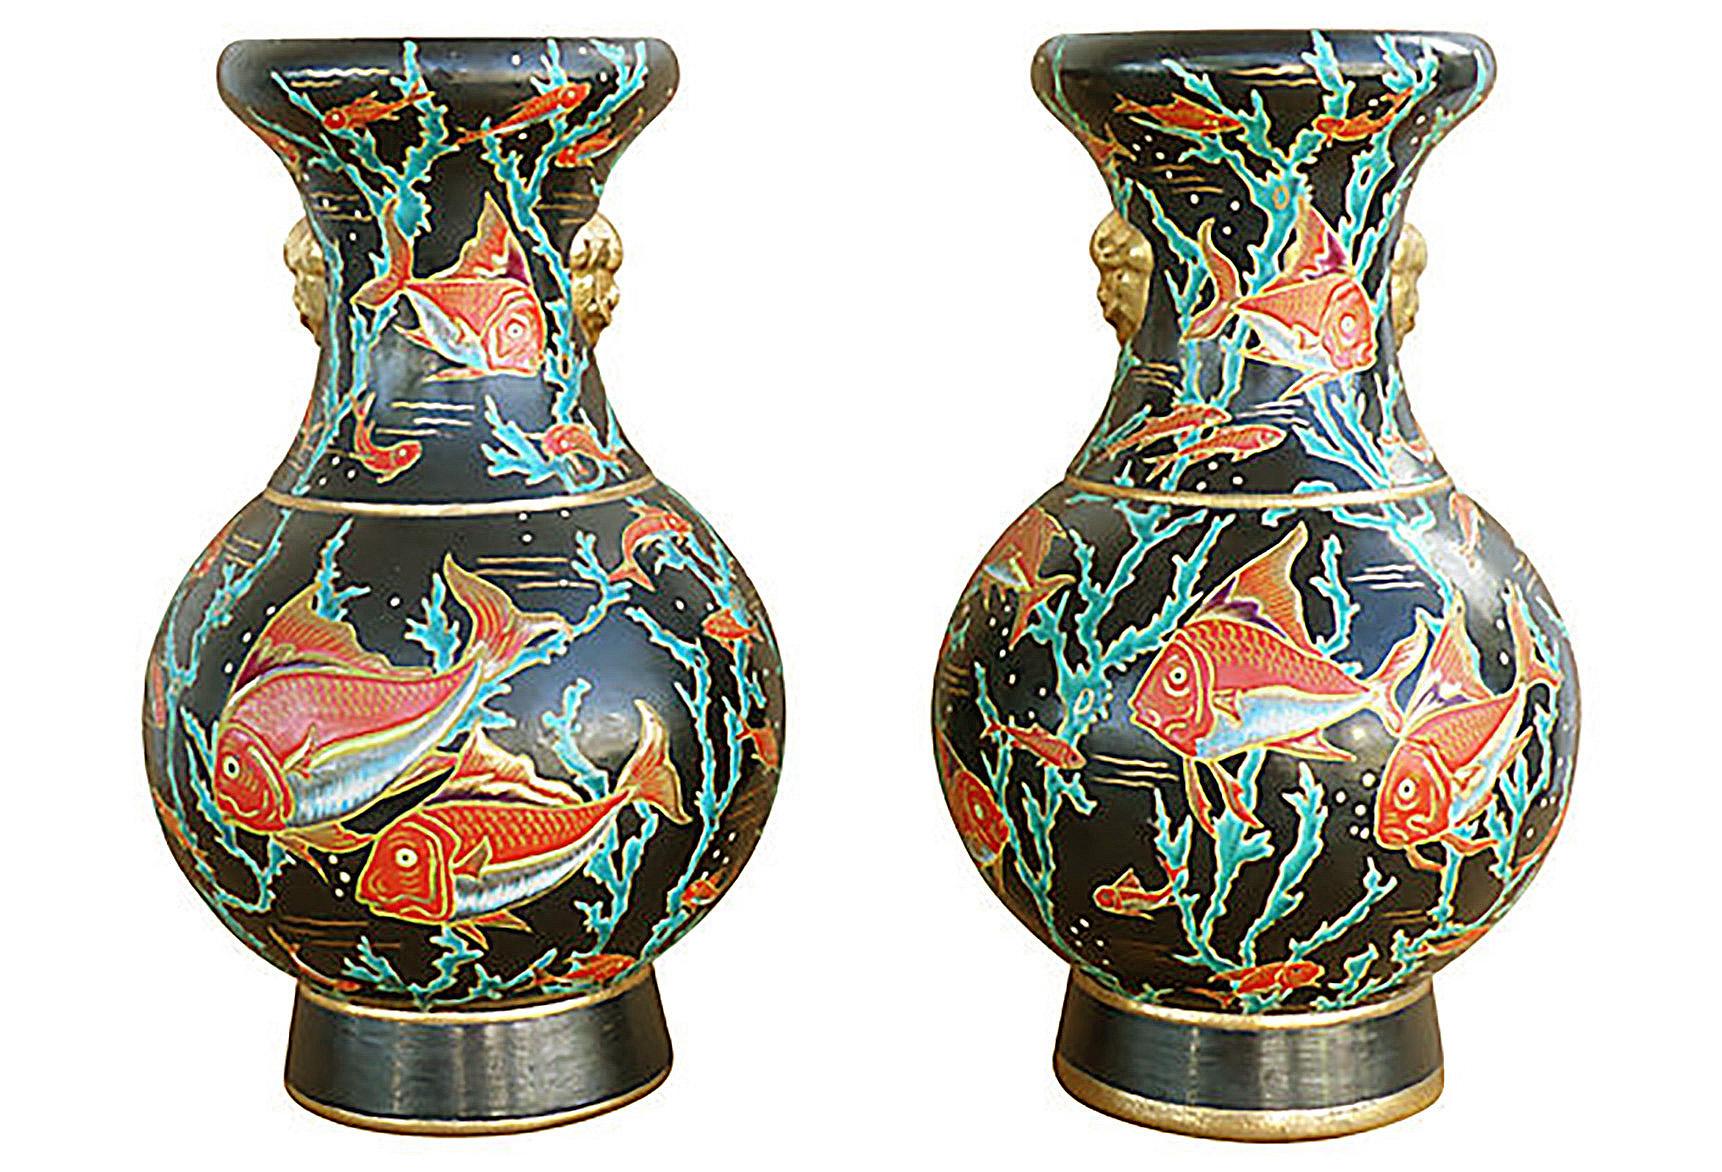 Maurice P. Chevallier Longwy French Ceramic Neptune Vases, 1950s

Offered for sale is a fine pair of Longwy vases in the Neptune pattern, circa 1954. The vases are designed by the prominent French ceramicist Maurice Paul Chevalier. This very rare